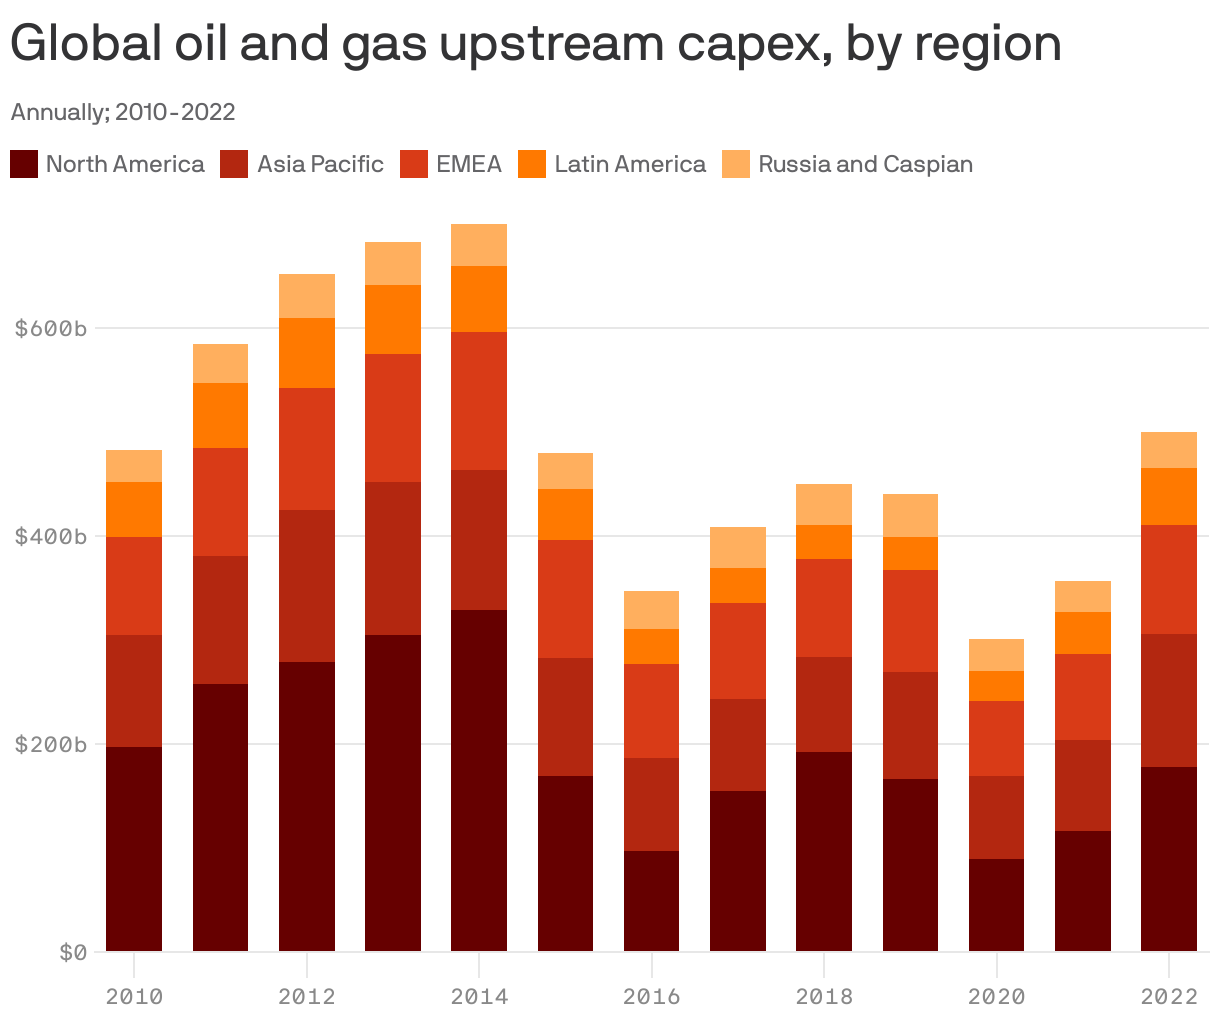 Global oil and gas upstream capex, by region